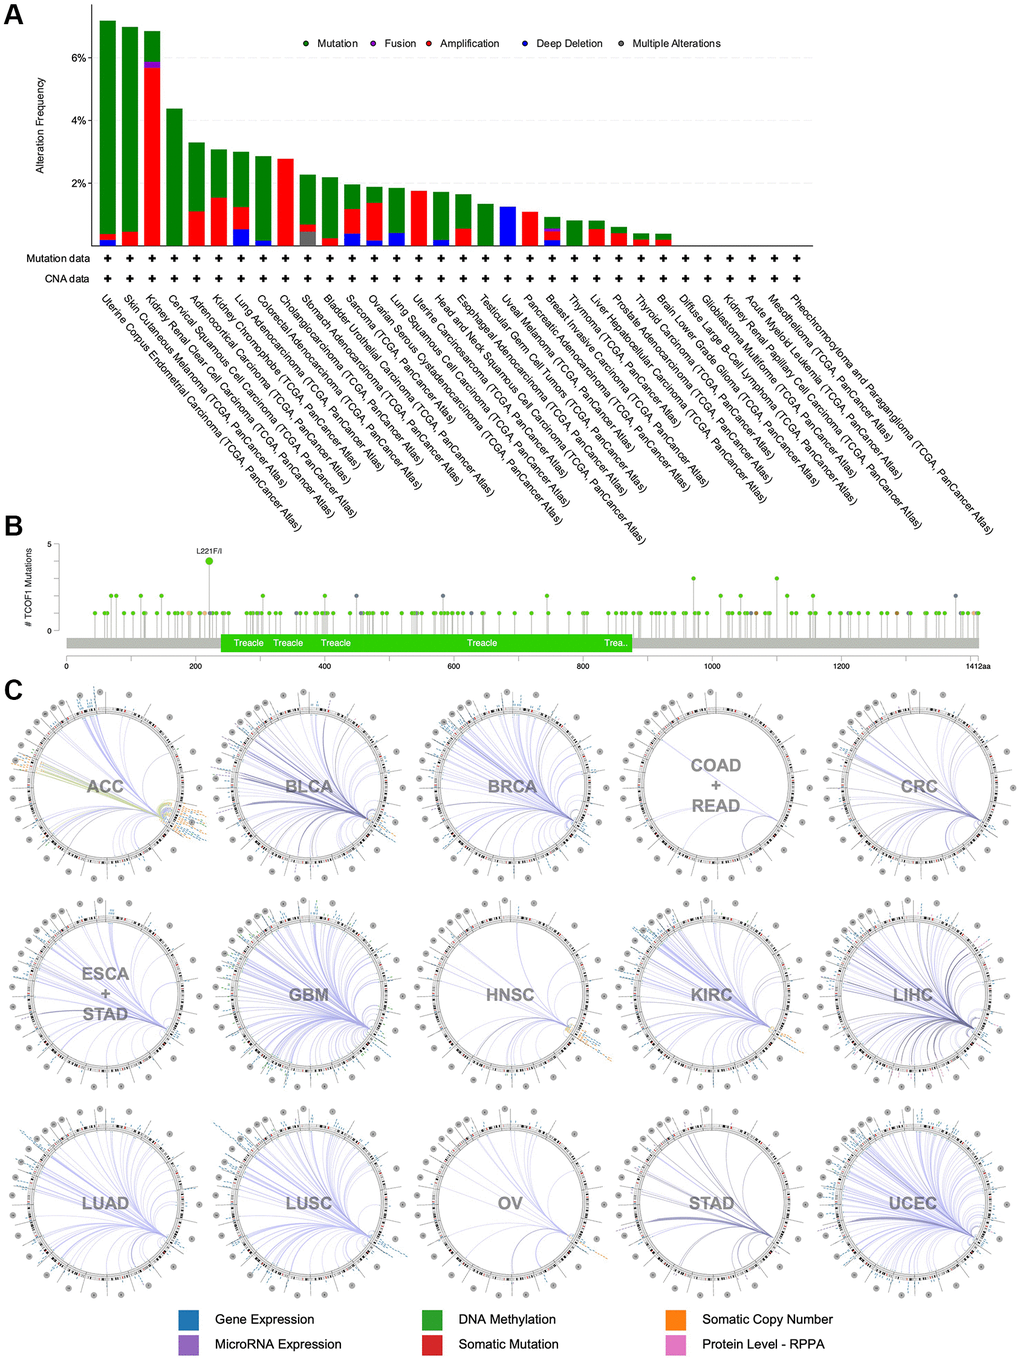 Mutational landscape and genome-wide association of TCOF1. (A) Alternation types and frequency of TCOF1 in different types of cancer. (B) Mutation sites of TCOF1 across cancers. (C) The genome-wide correlation between TCOF1 and other signatures from TCGA, visualized using Regulome Explorer.